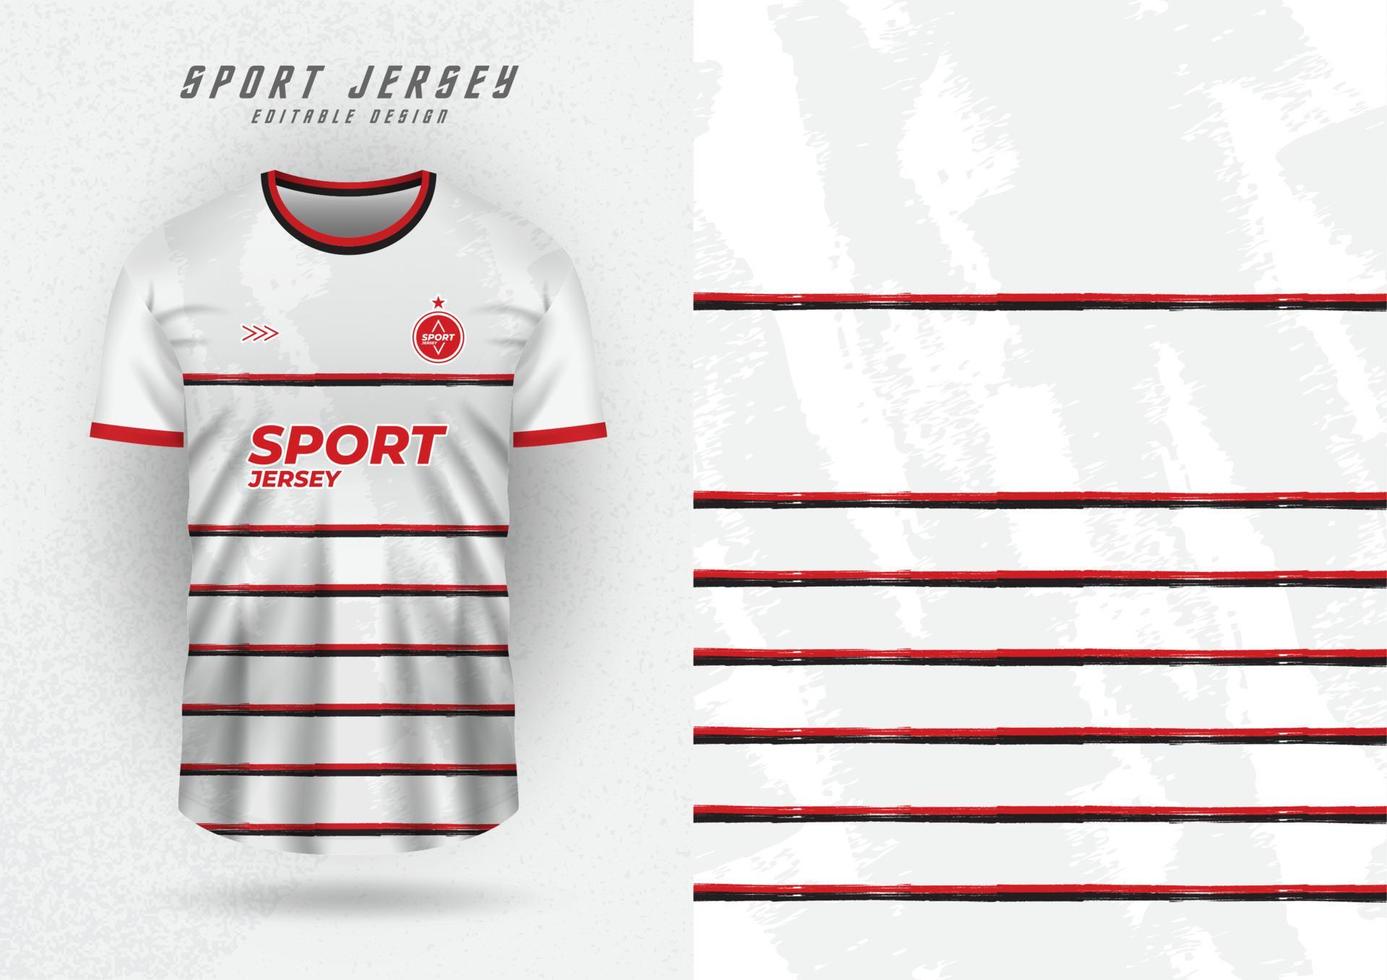 Sports jersey, jersey, running shirt, white with red and black stripes pattern. vector